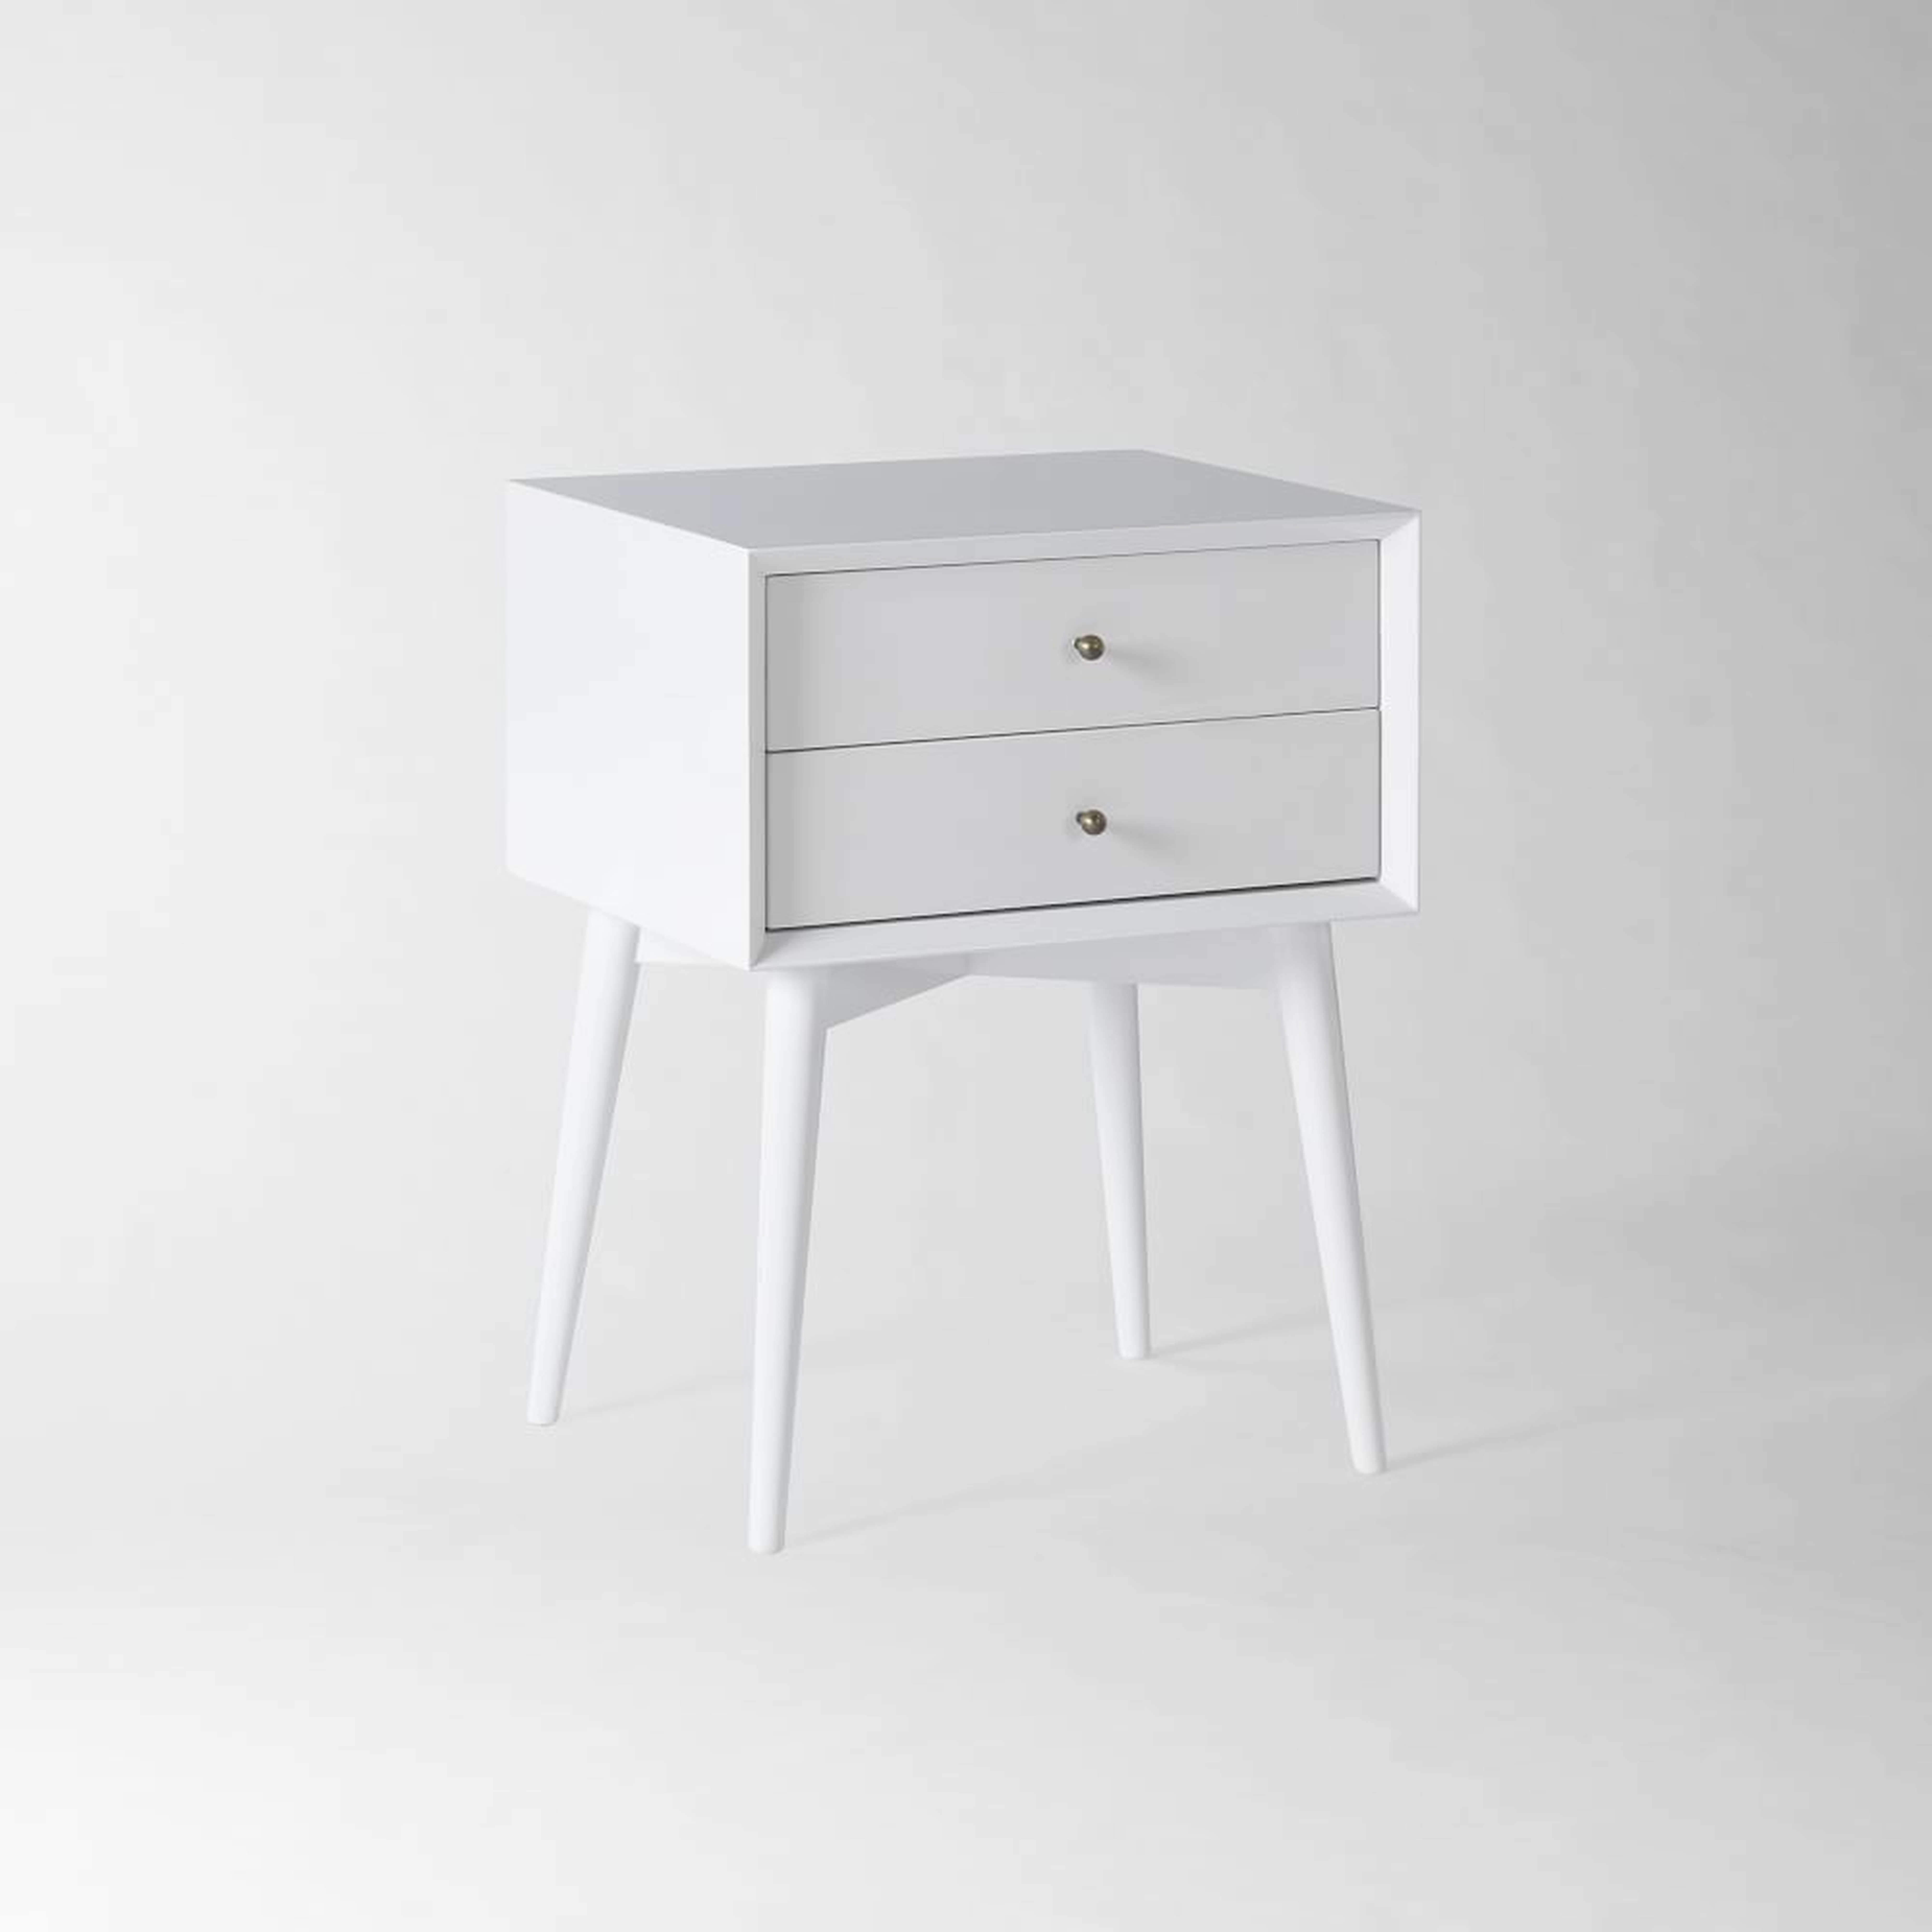 Mid-Century Nightstand, White Lacquer - West Elm